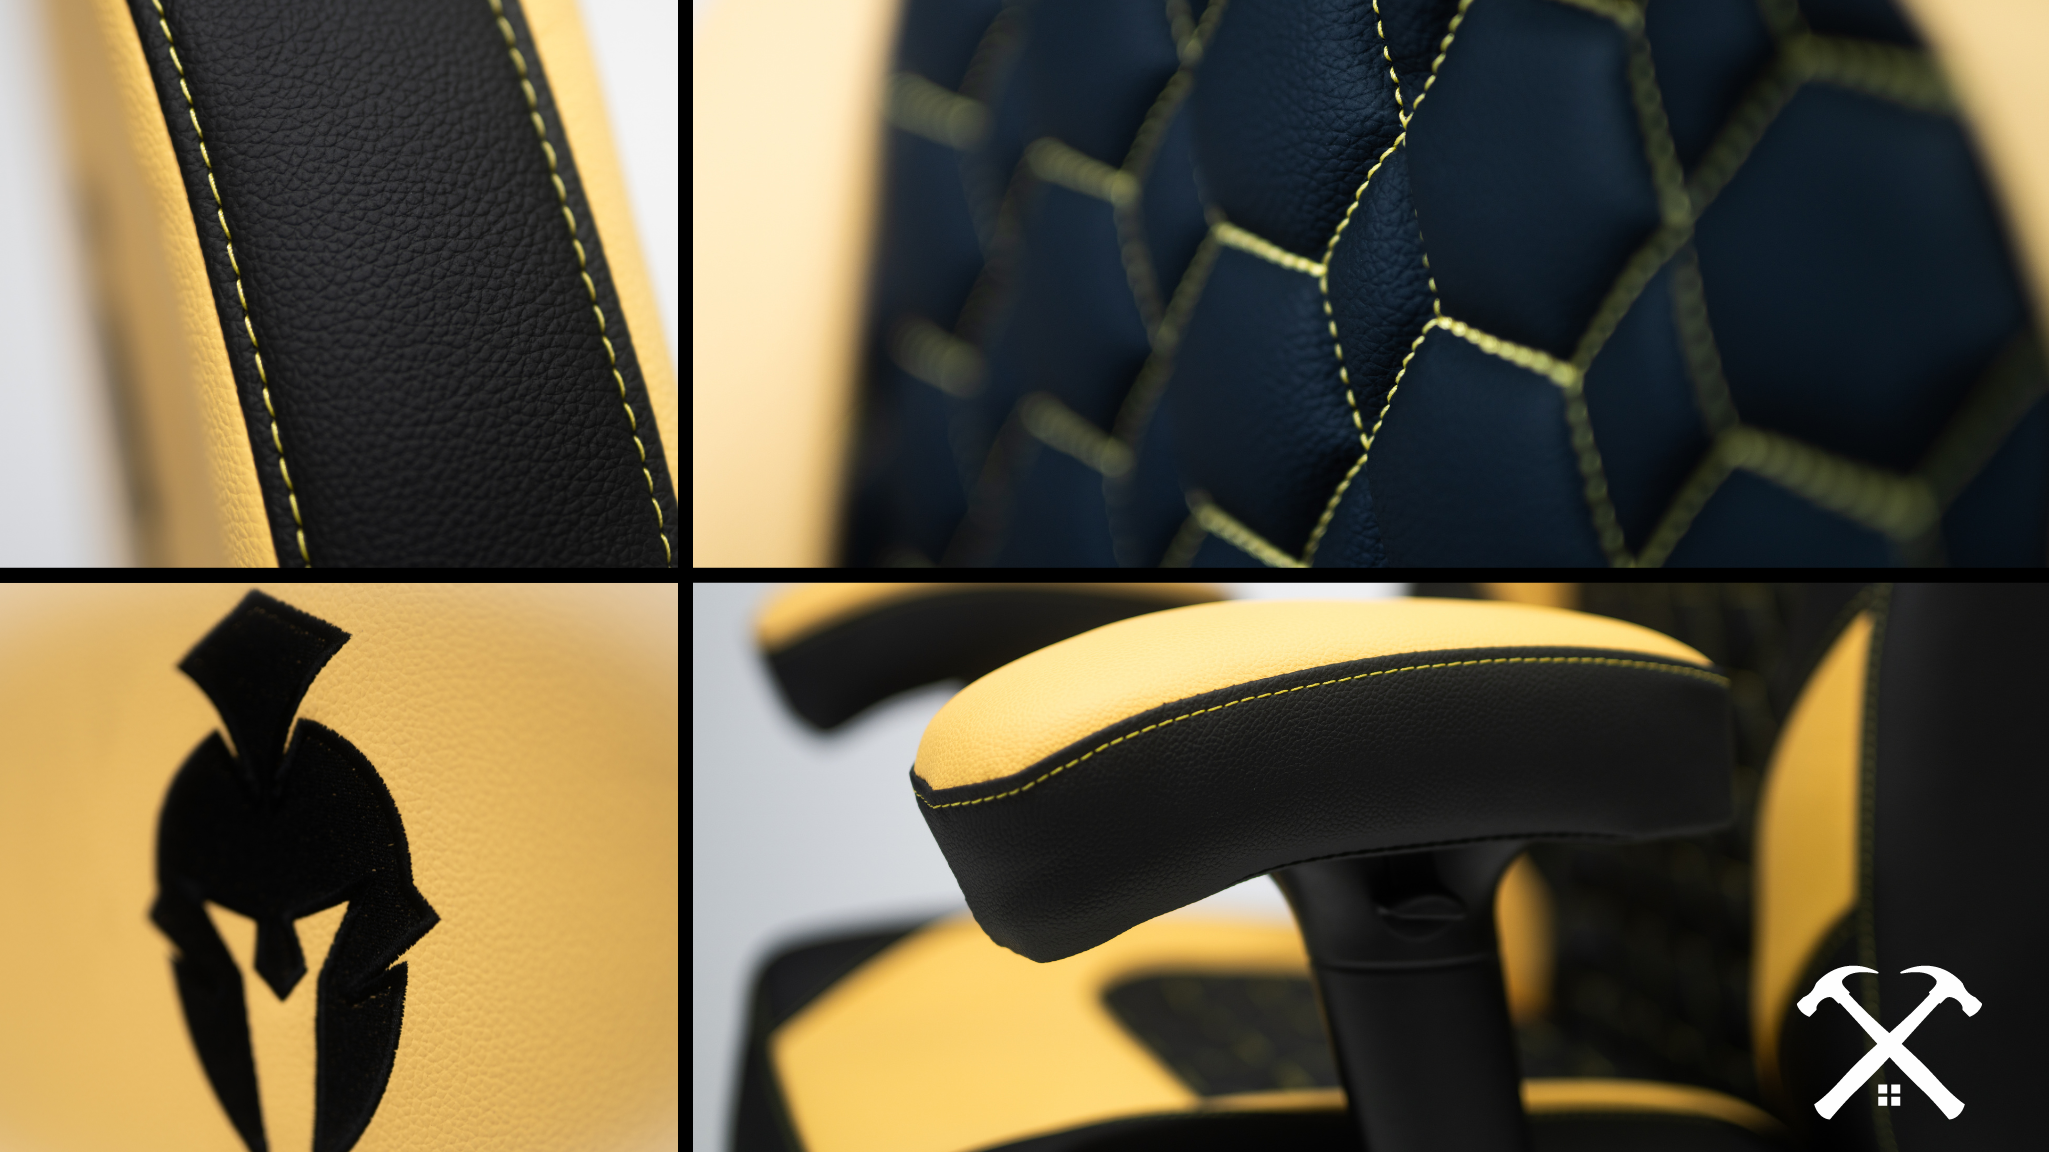 High Quality Stitching in a yellow and black gaming chair close up.